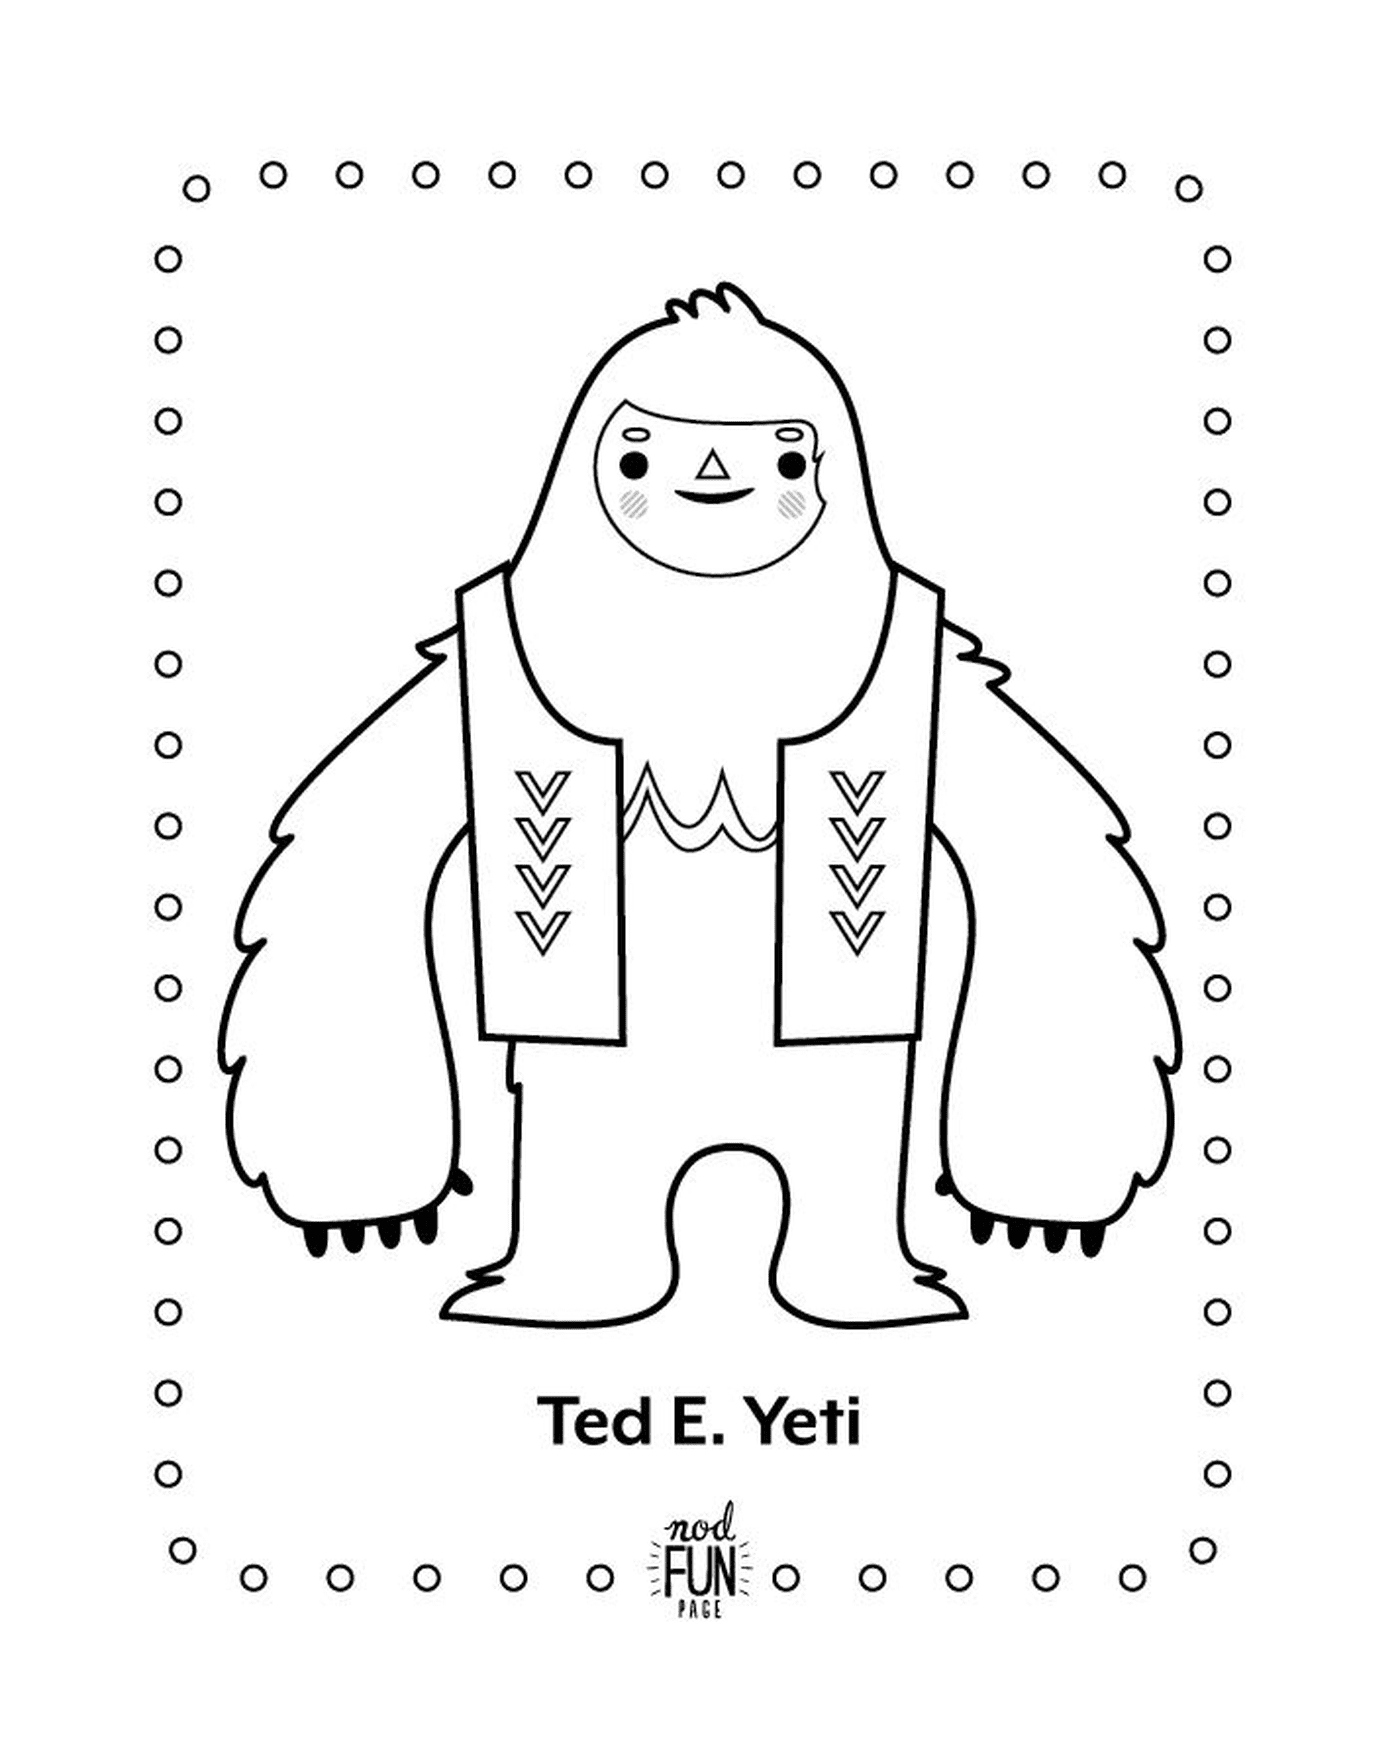  Yeti dressed in a vest 